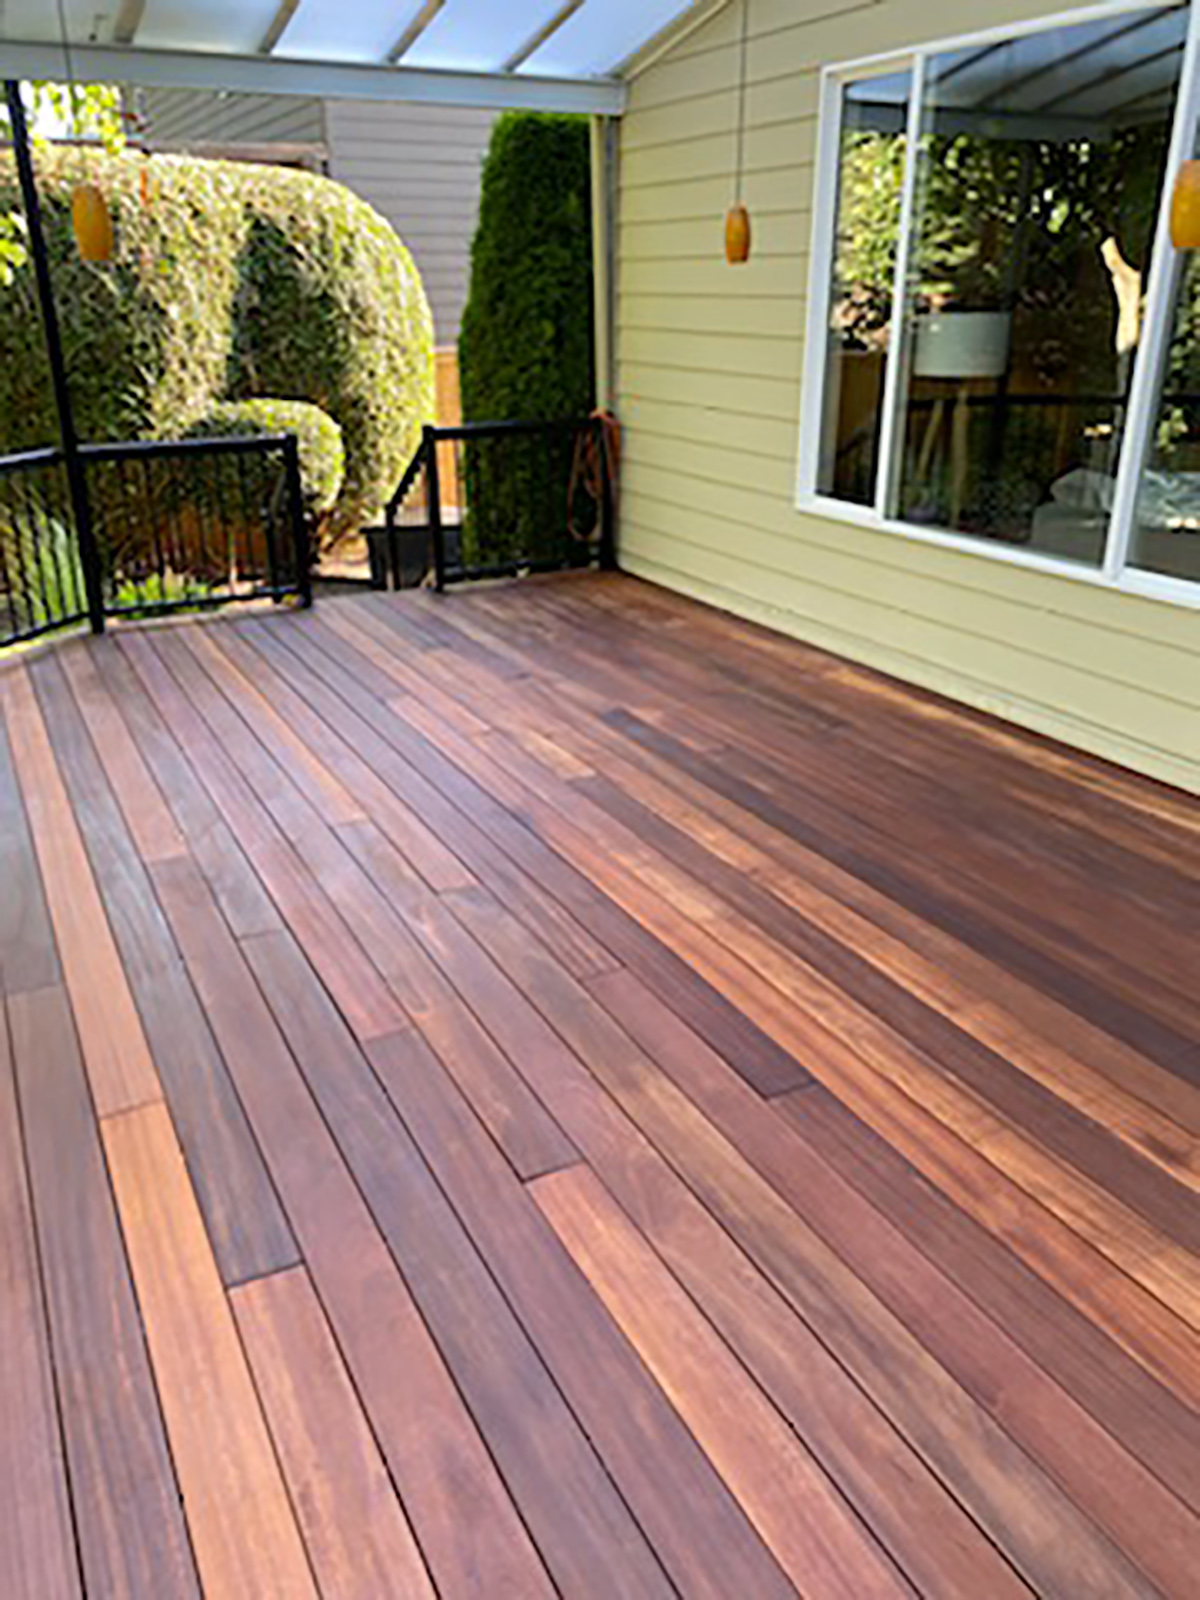 Re-stain the LPE deck